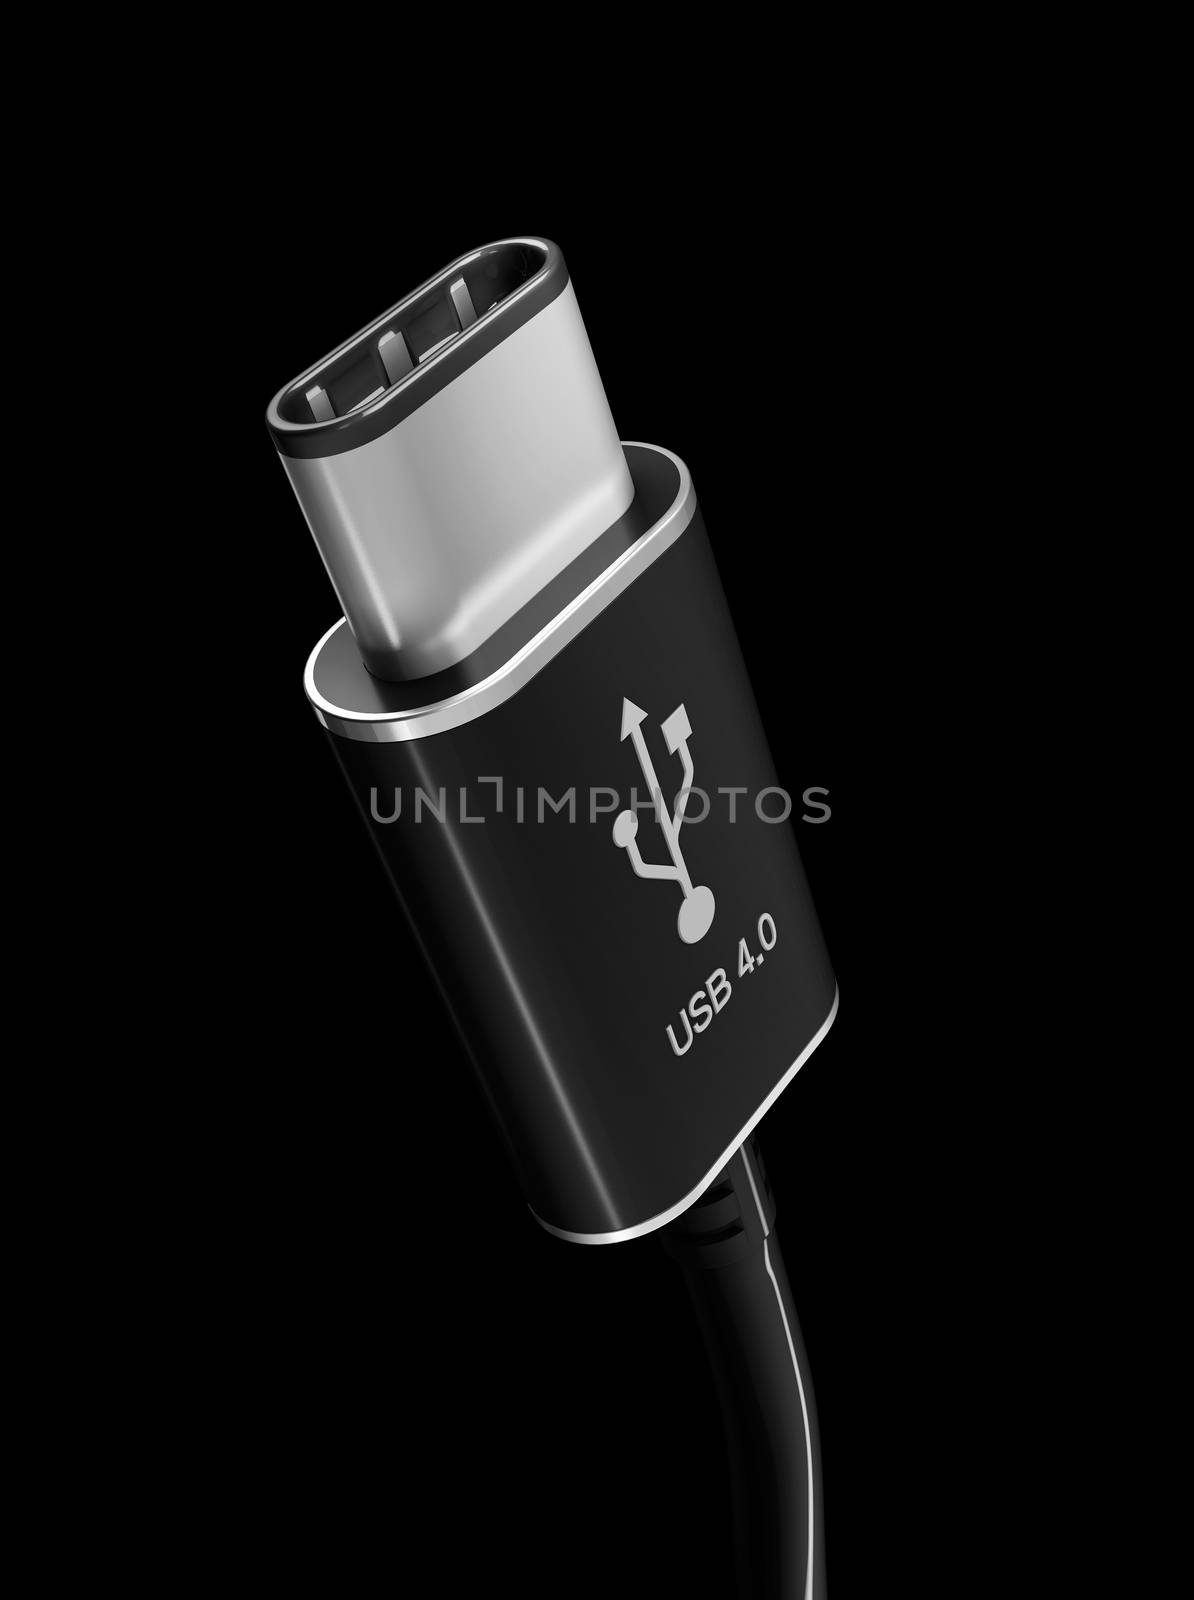 USB Type C or USB 4 connector cable line art 3d Illustration by tussik